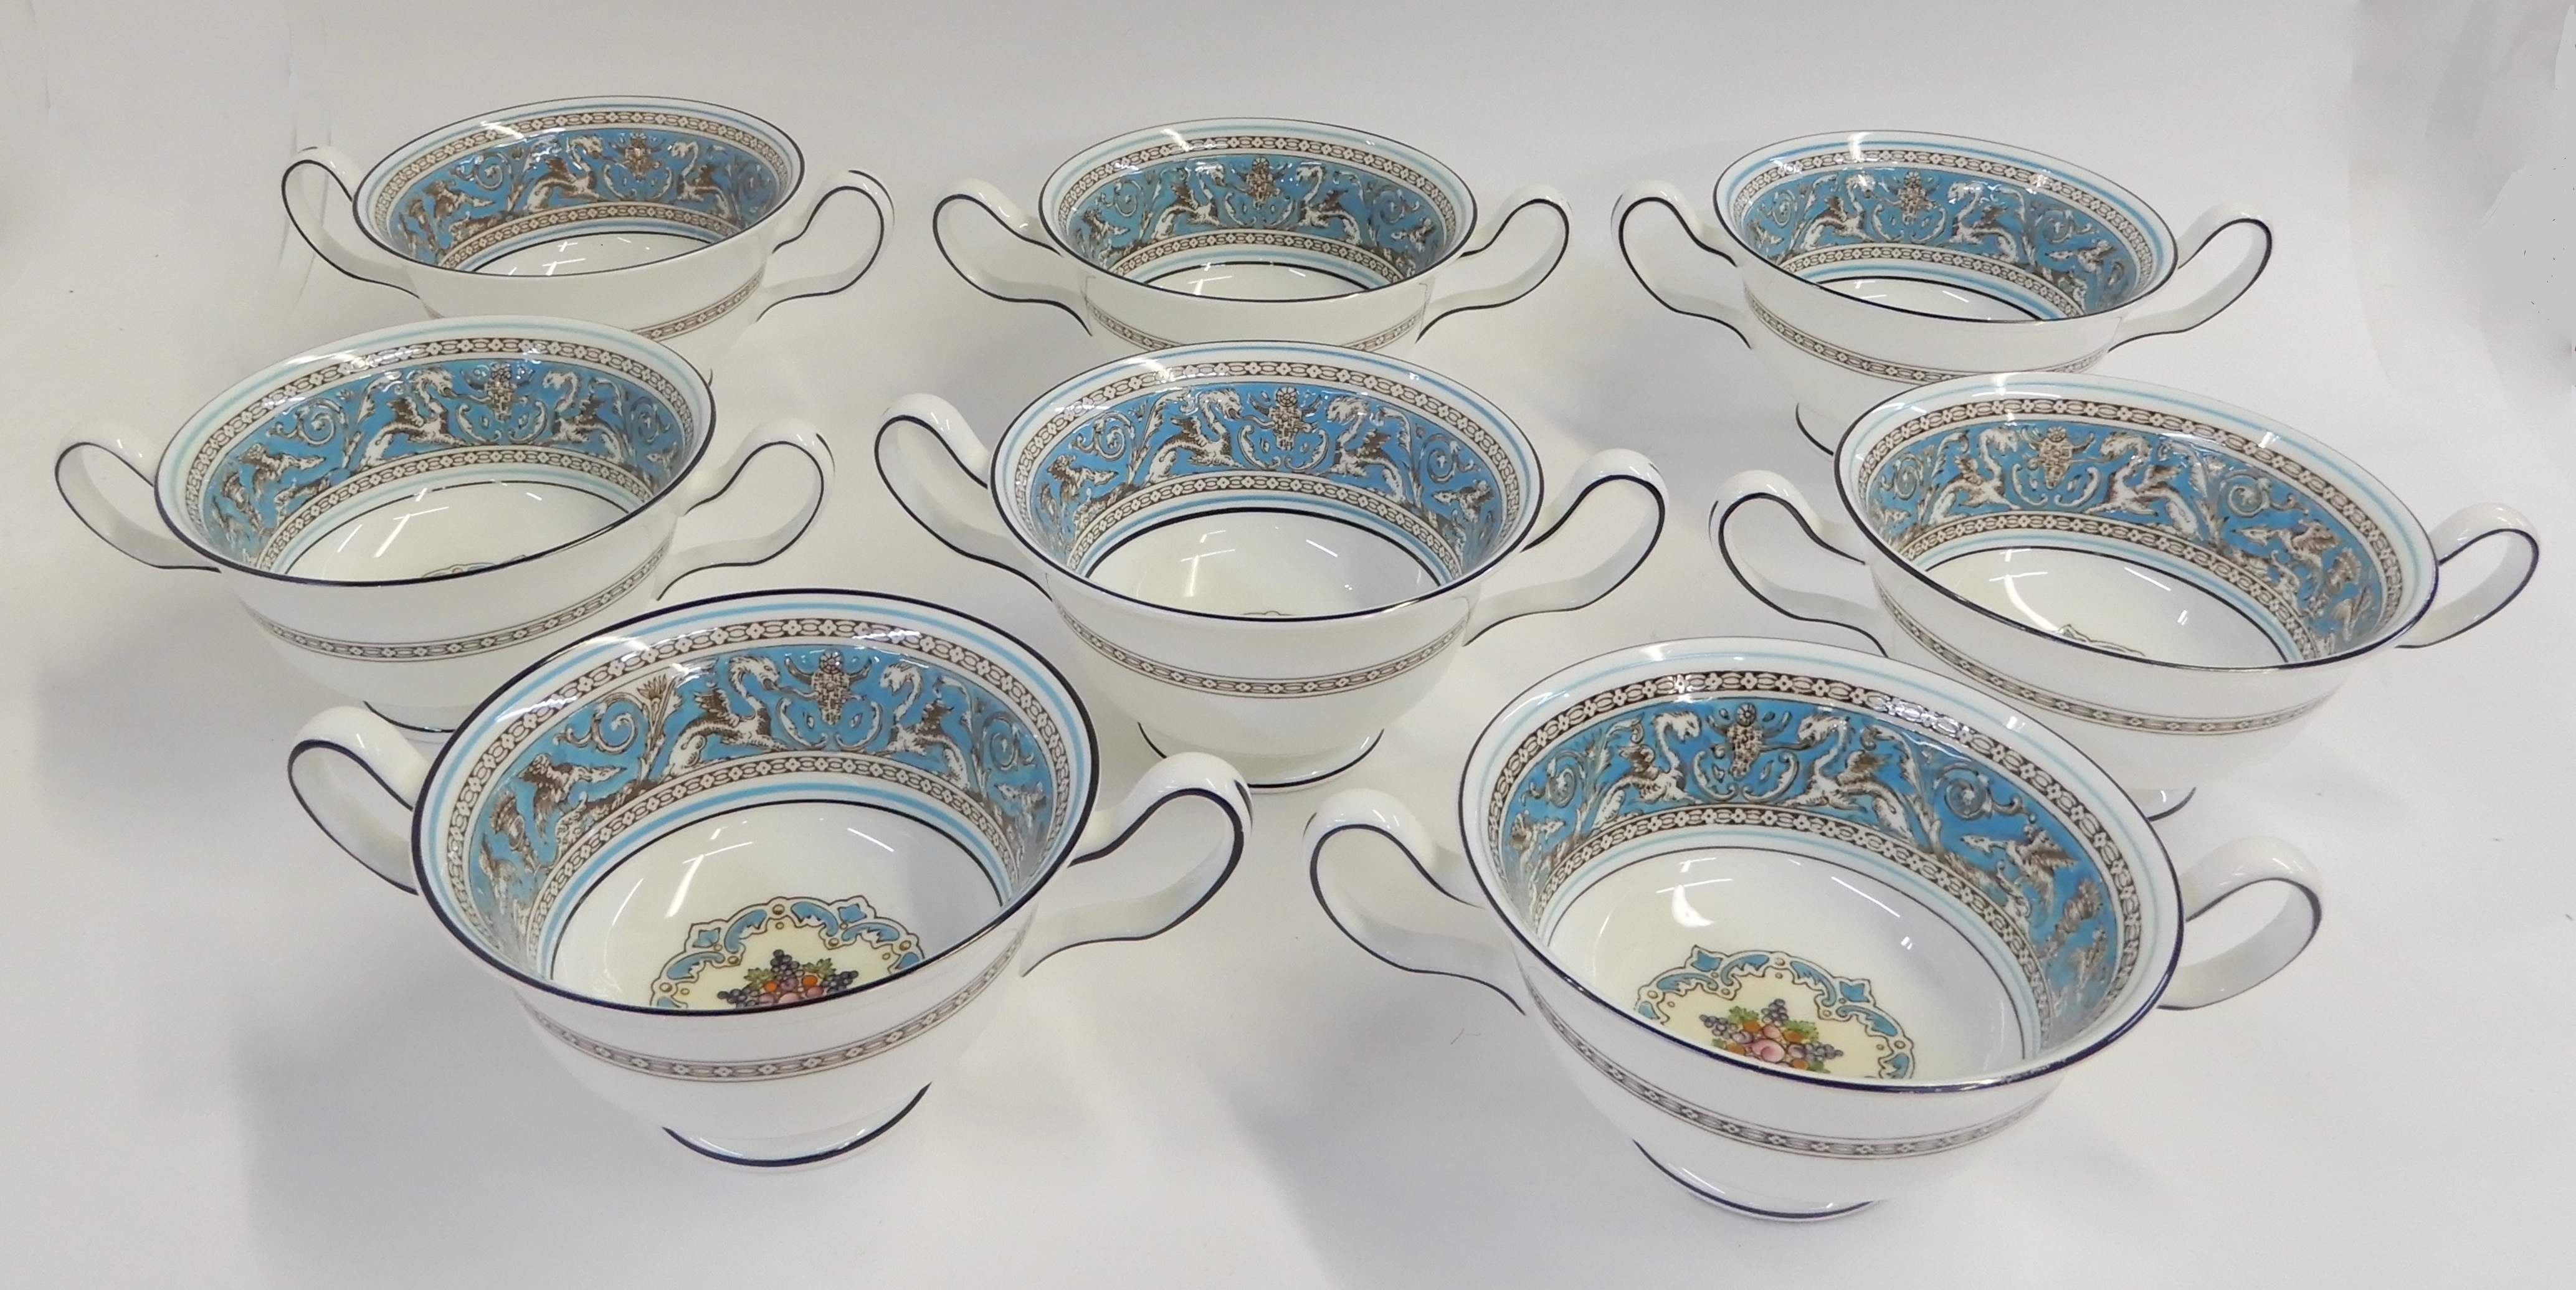 AN EXTENSIVE WEDGWOOD TURQUOISE FLORENTINE DINNER SERVICE comprising